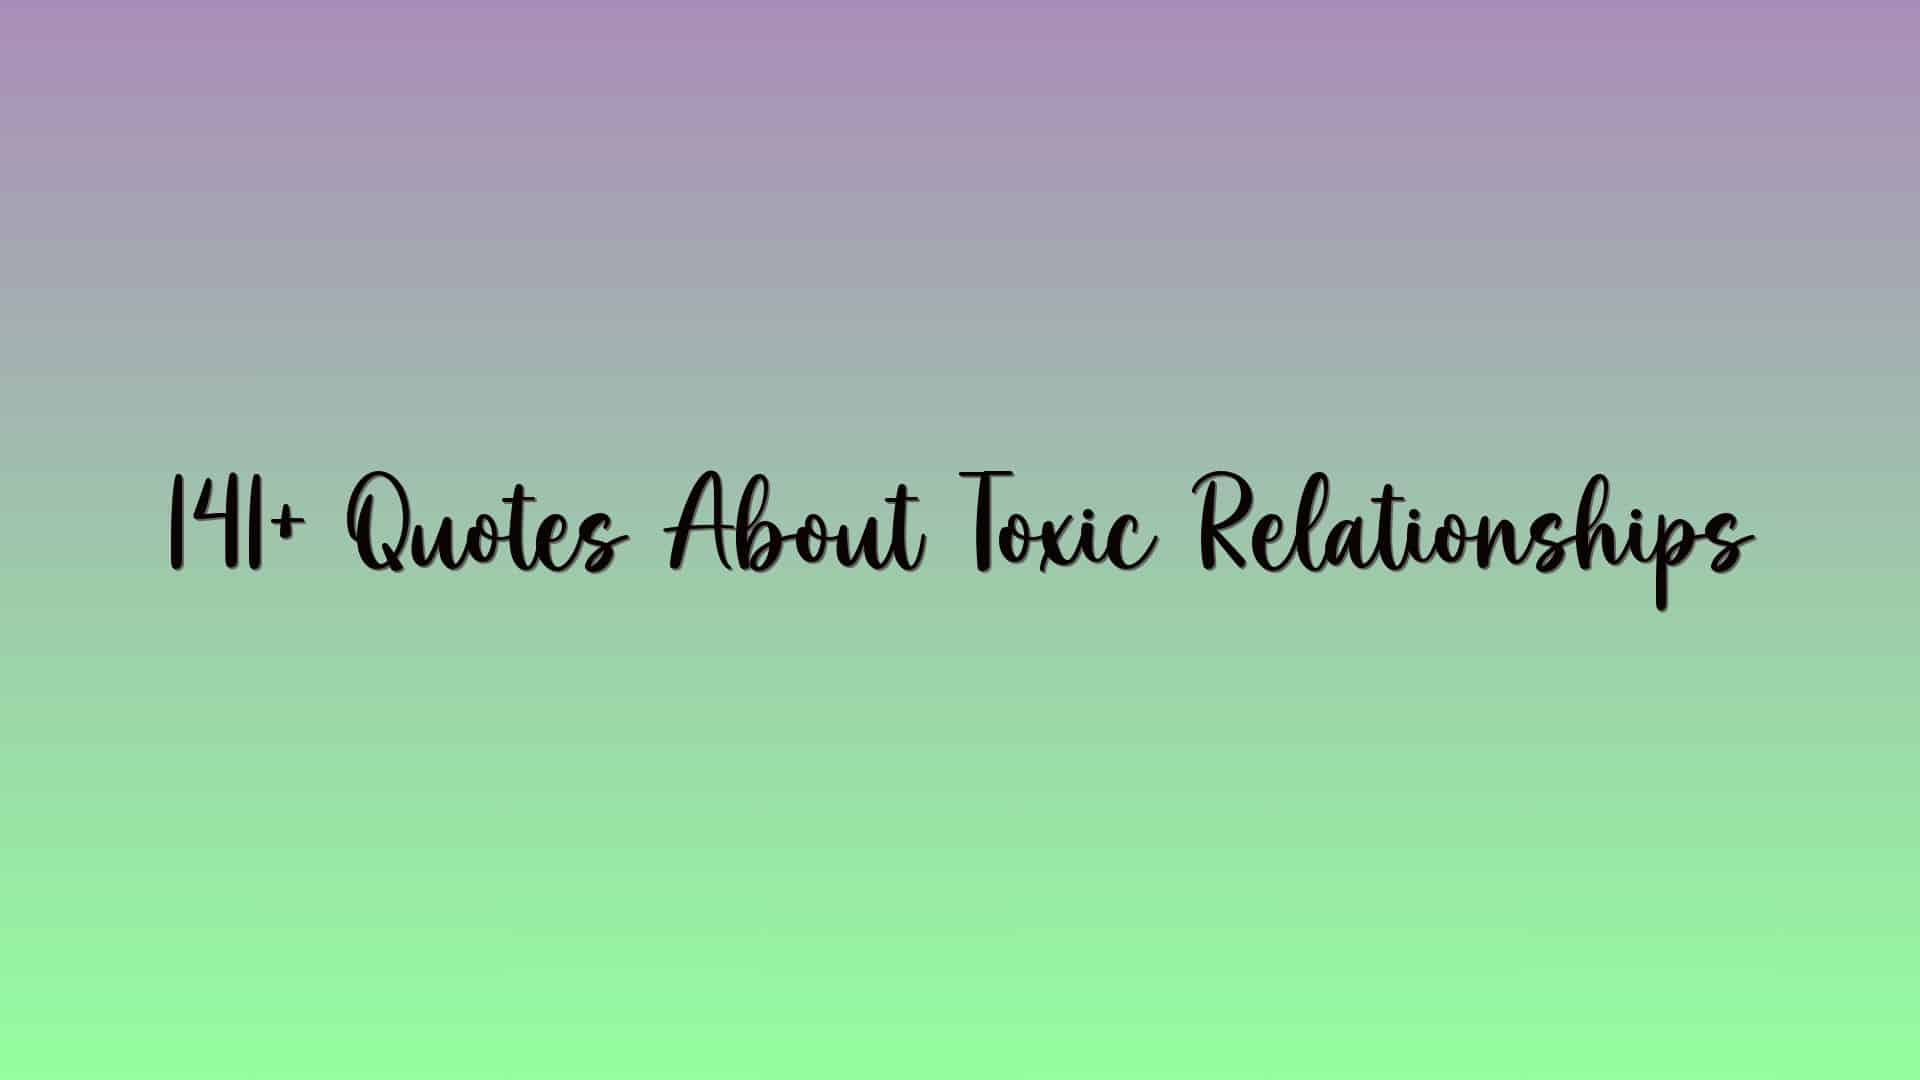 141+ Quotes About Toxic Relationships